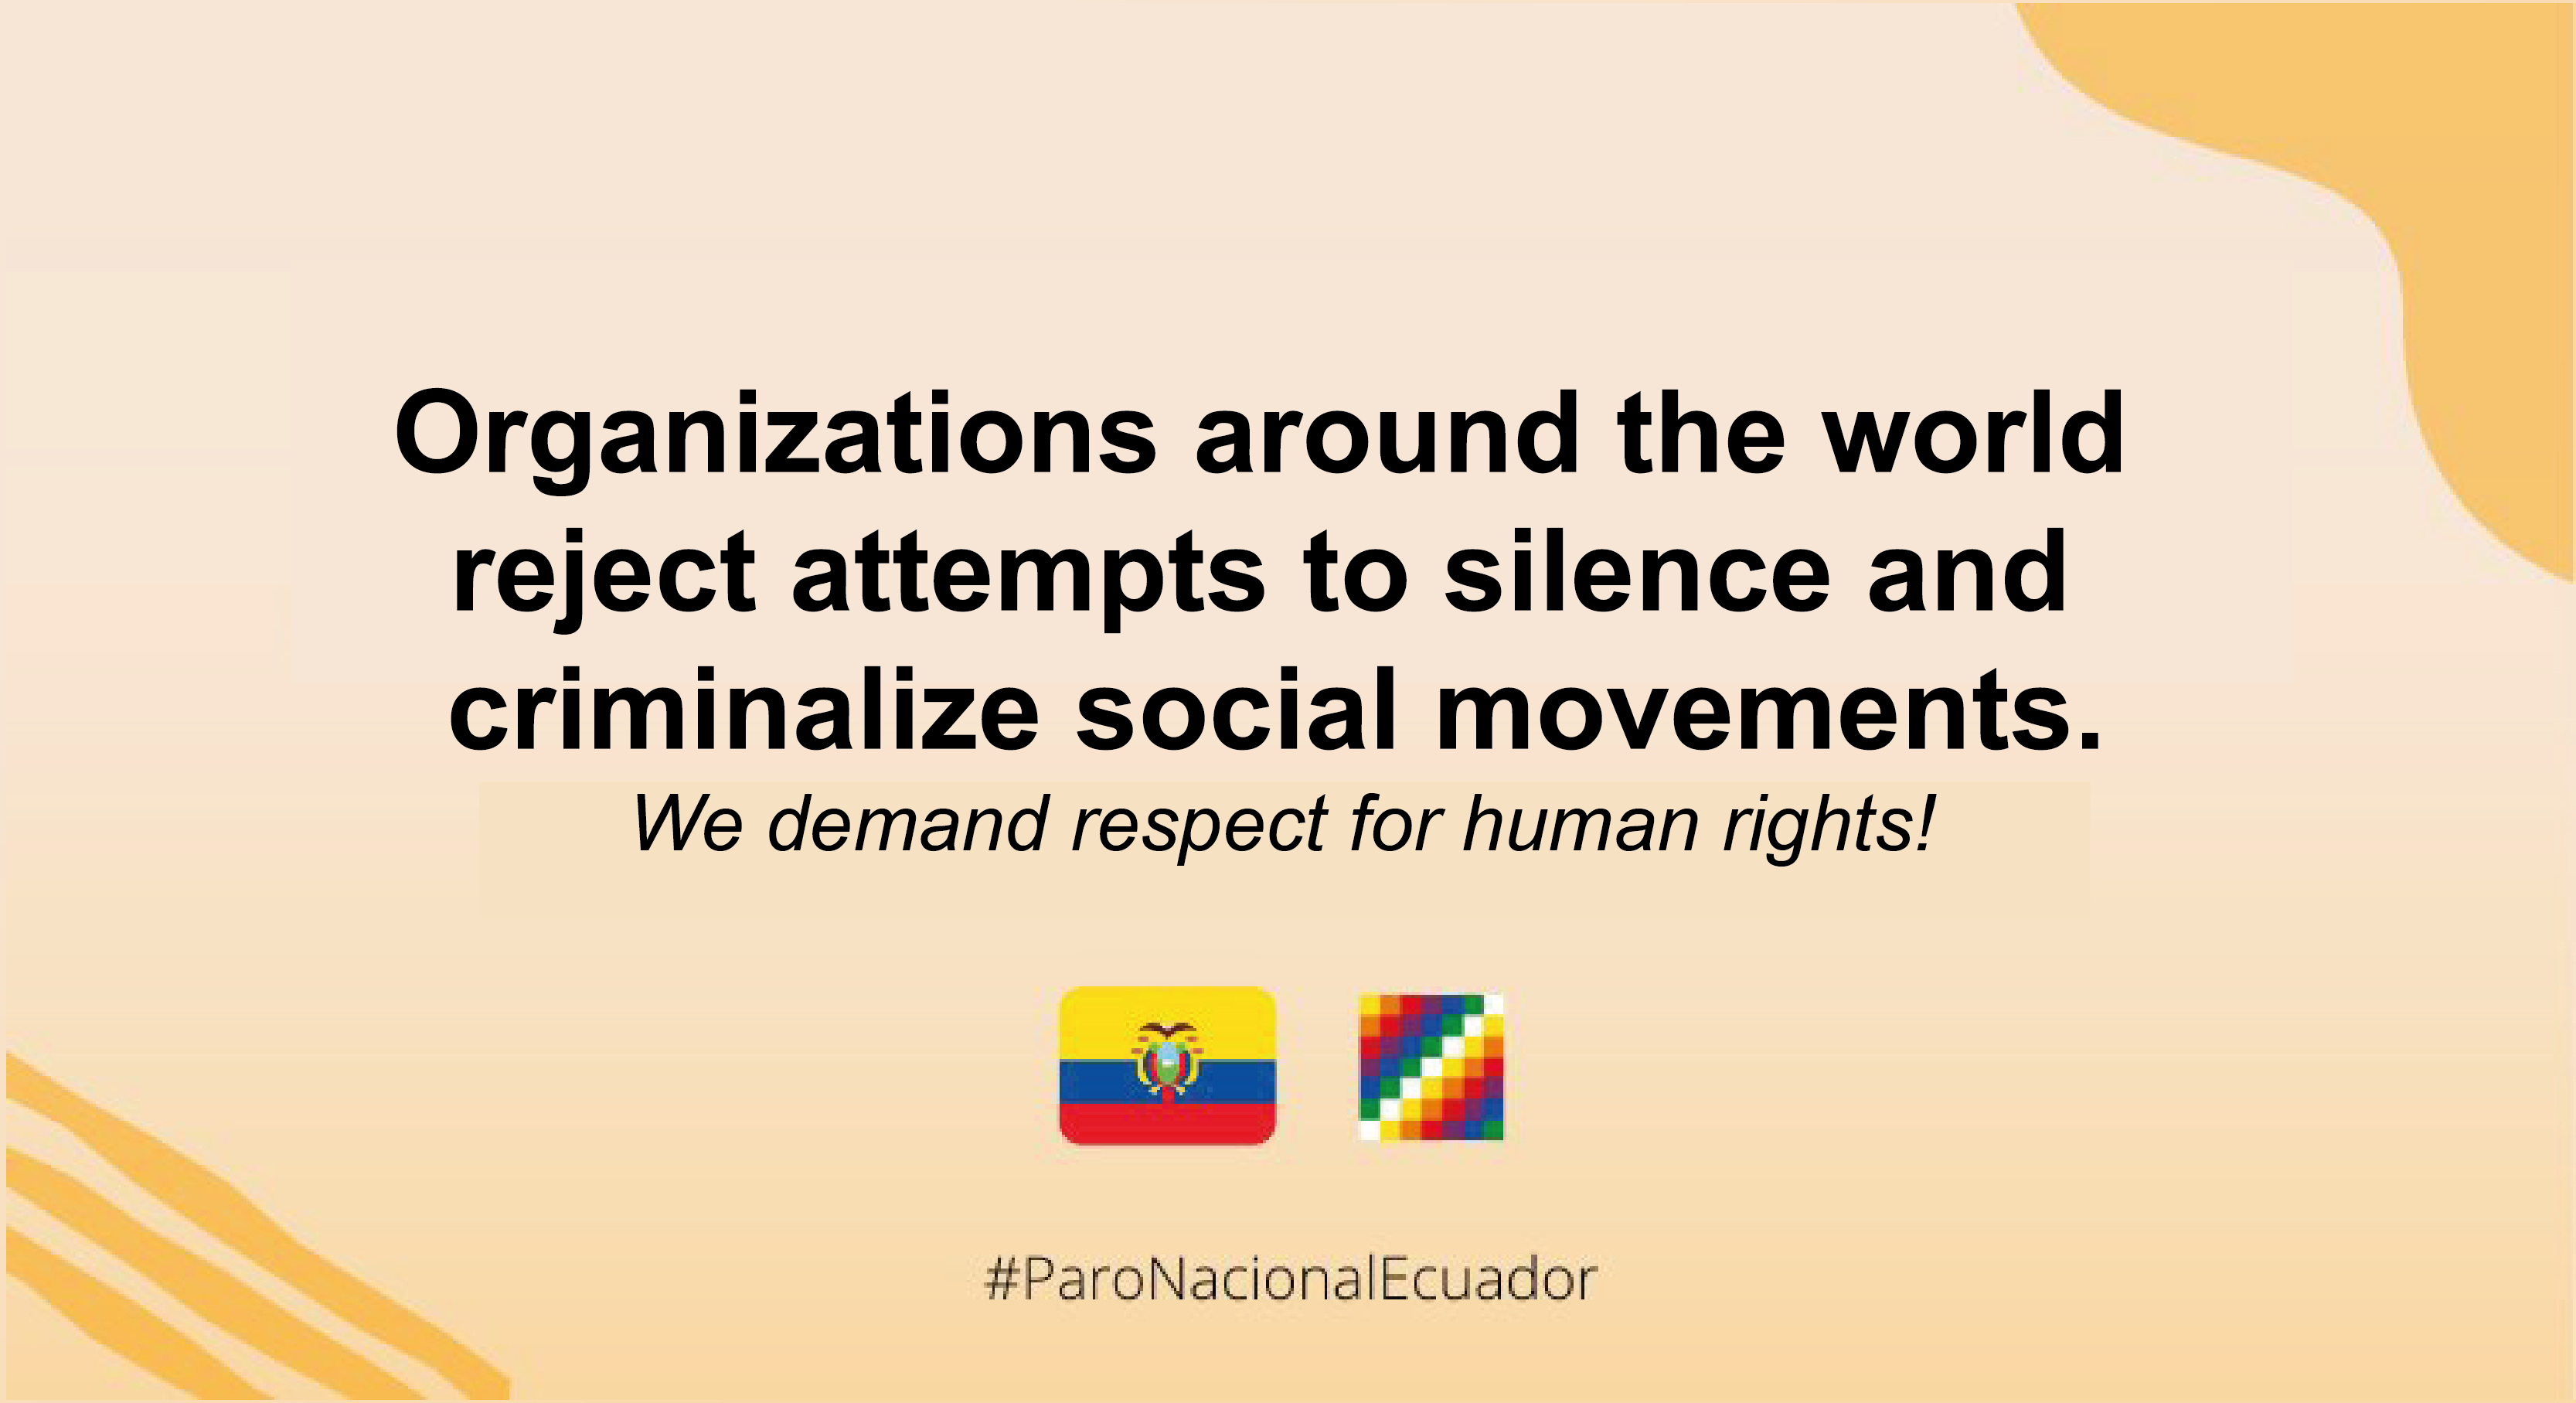 Civil society organizations reject attempts to silence and criminalize social movements in the context of protests in Ecuador and demand that Human Rights are respected